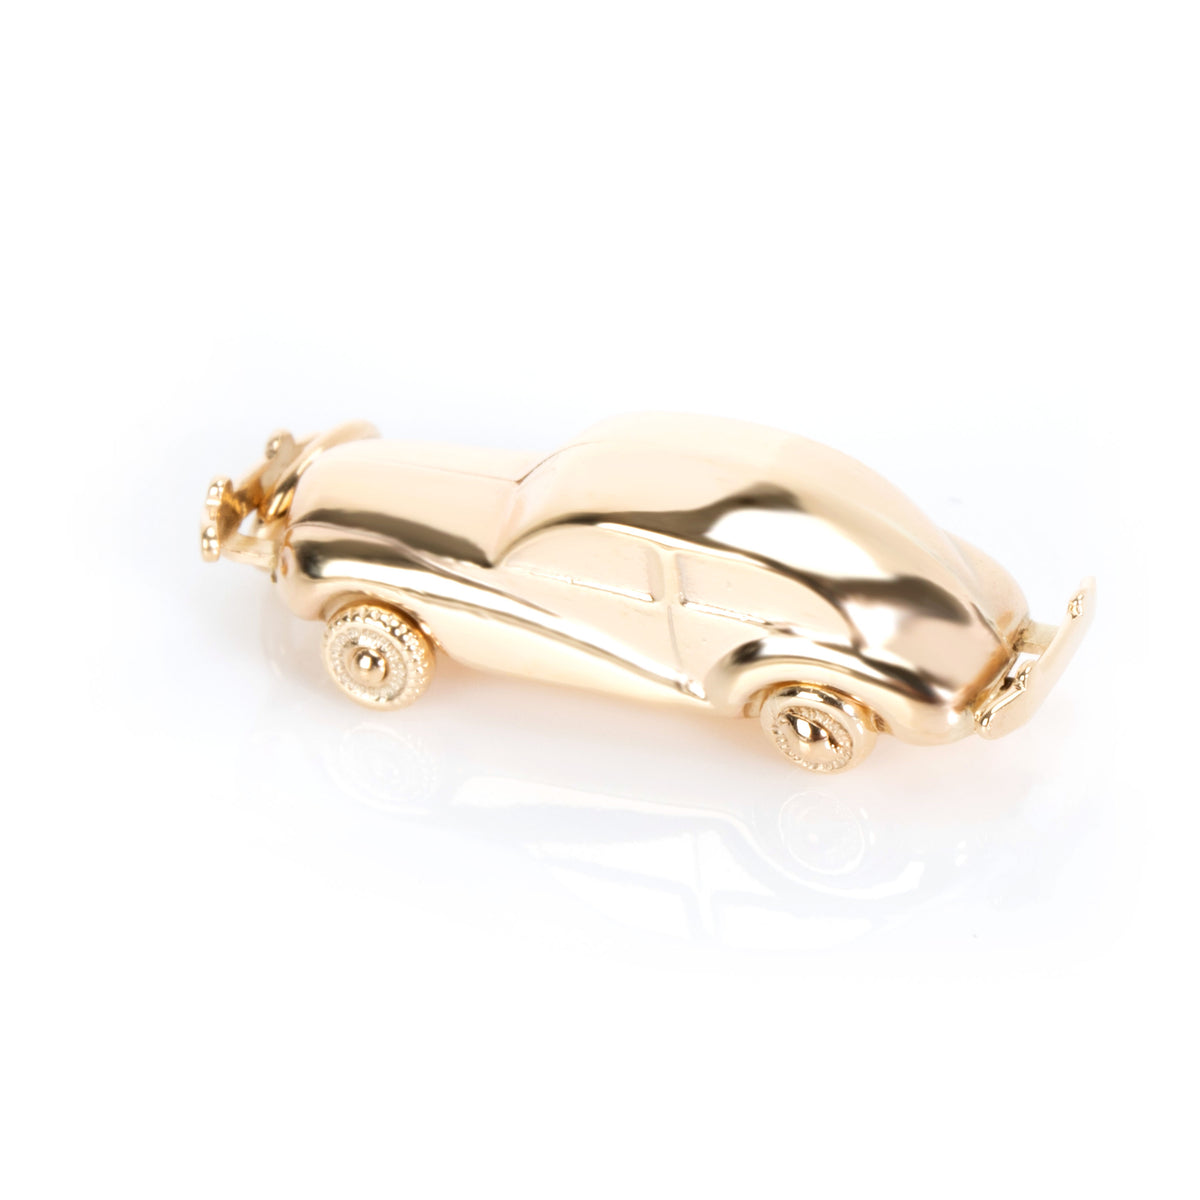 Vintage Car Charm in 14K Yellow Gold